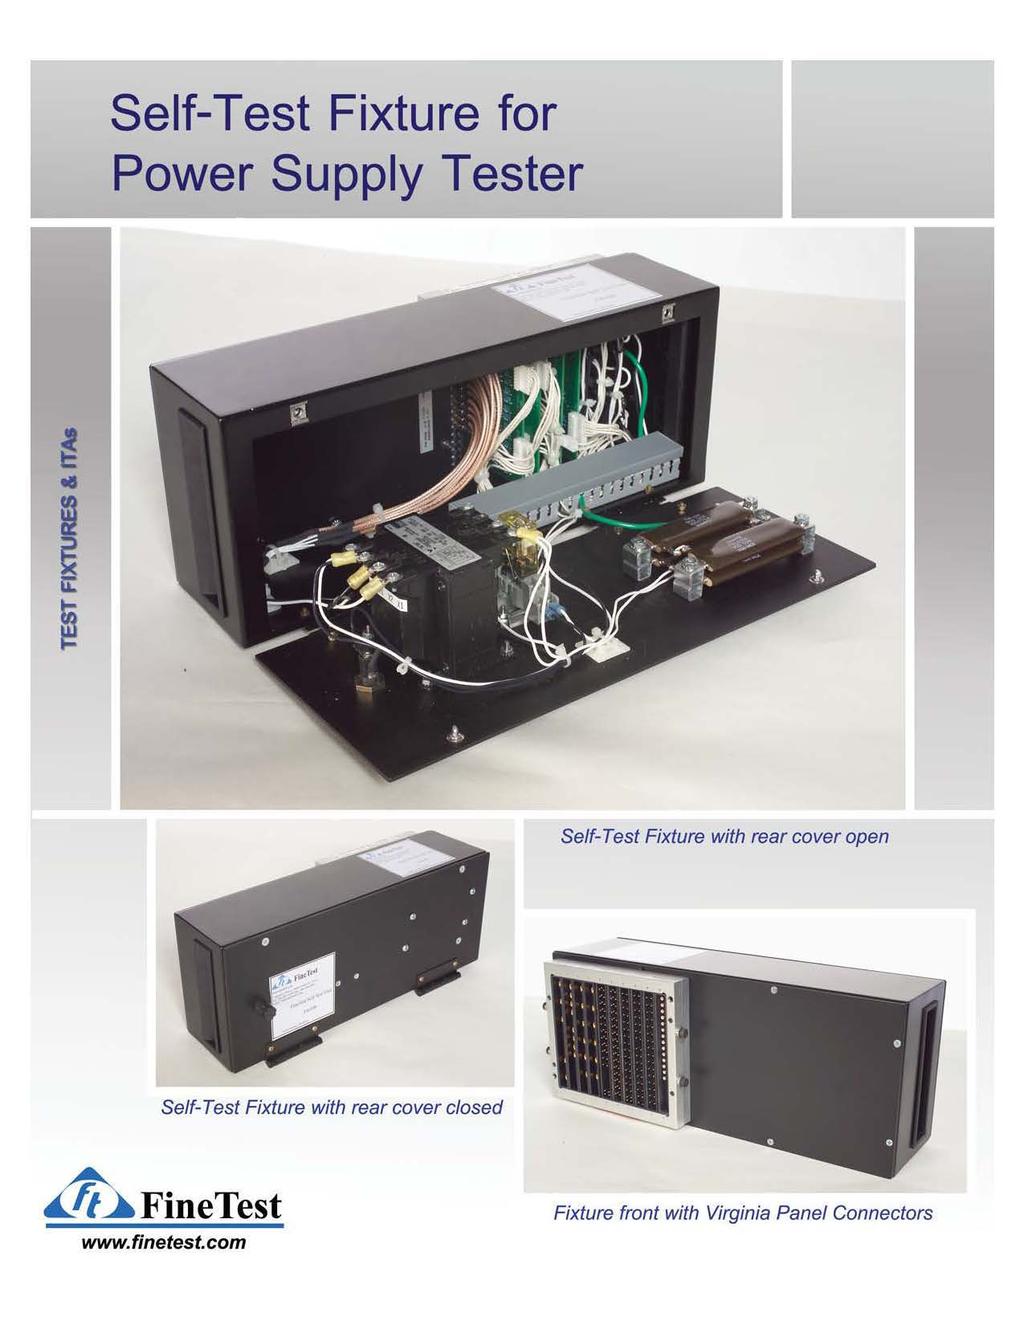 Self-Test Fixture for Power Supply Tester Self-Test Fixture with rear cover open